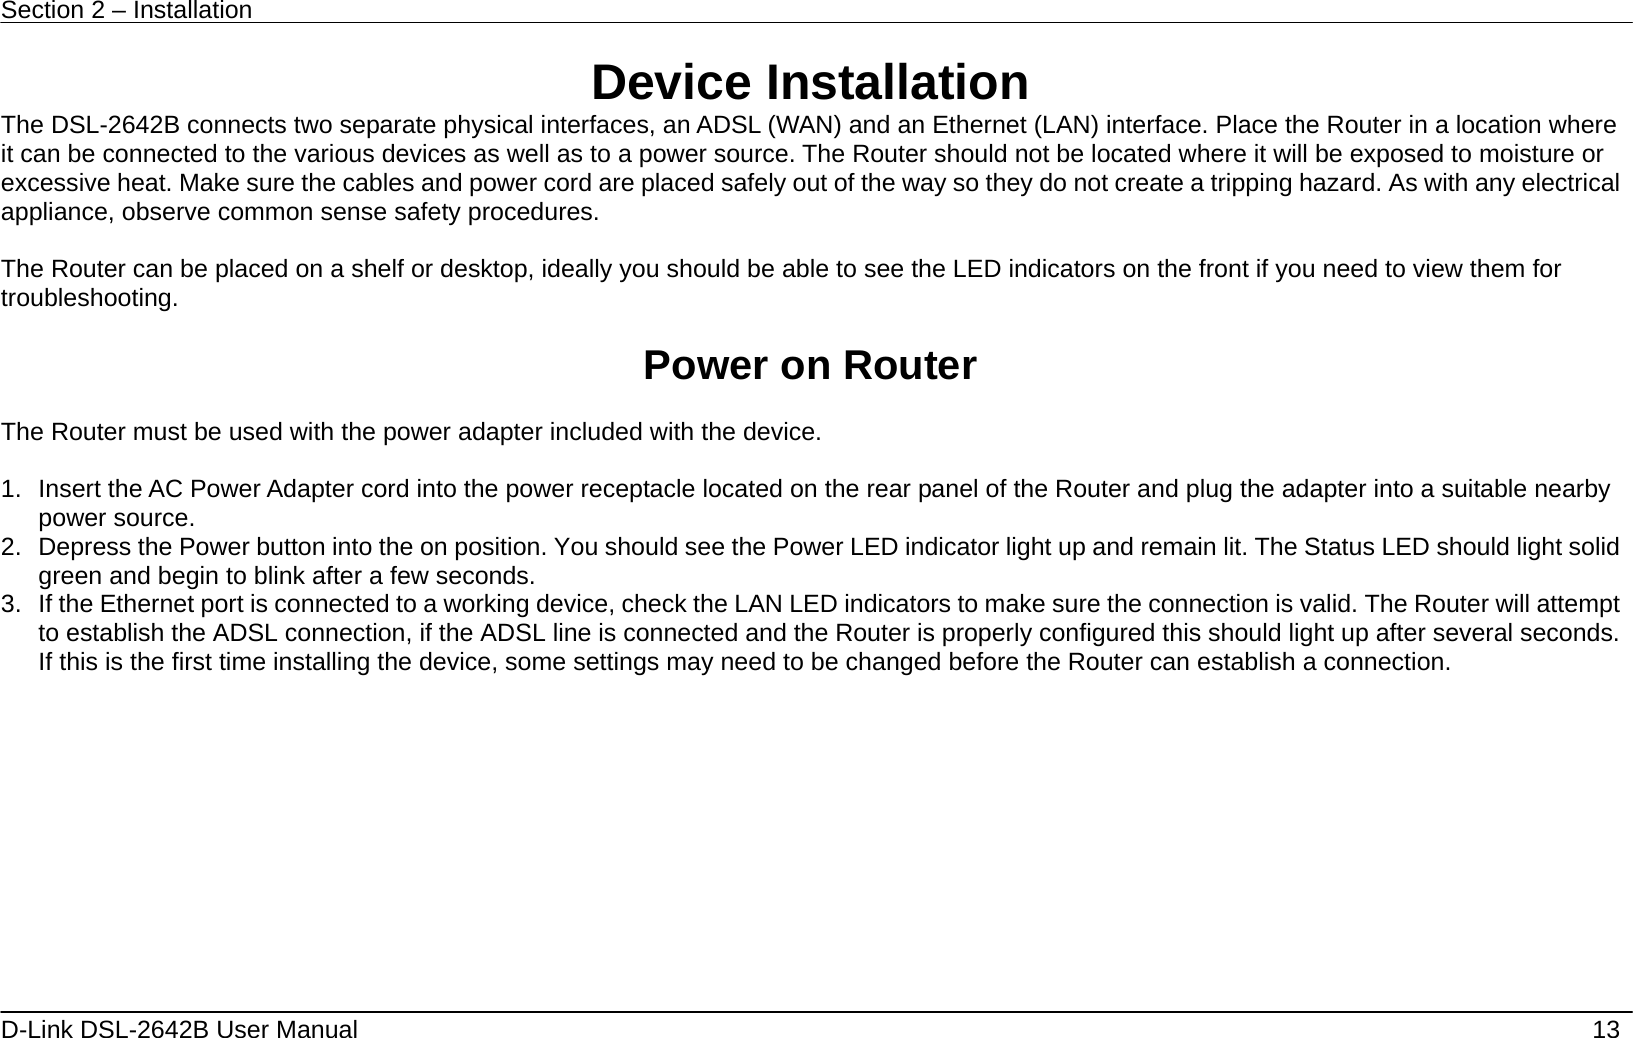 Section 2 – Installation   D-Link DSL-2642B User Manual    13 Device Installation The DSL-2642B connects two separate physical interfaces, an ADSL (WAN) and an Ethernet (LAN) interface. Place the Router in a location where it can be connected to the various devices as well as to a power source. The Router should not be located where it will be exposed to moisture or excessive heat. Make sure the cables and power cord are placed safely out of the way so they do not create a tripping hazard. As with any electrical appliance, observe common sense safety procedures.  The Router can be placed on a shelf or desktop, ideally you should be able to see the LED indicators on the front if you need to view them for troubleshooting.  Power on Router  The Router must be used with the power adapter included with the device.  1.  Insert the AC Power Adapter cord into the power receptacle located on the rear panel of the Router and plug the adapter into a suitable nearby power source. 2.  Depress the Power button into the on position. You should see the Power LED indicator light up and remain lit. The Status LED should light solid green and begin to blink after a few seconds. 3.  If the Ethernet port is connected to a working device, check the LAN LED indicators to make sure the connection is valid. The Router will attempt to establish the ADSL connection, if the ADSL line is connected and the Router is properly configured this should light up after several seconds. If this is the first time installing the device, some settings may need to be changed before the Router can establish a connection.    